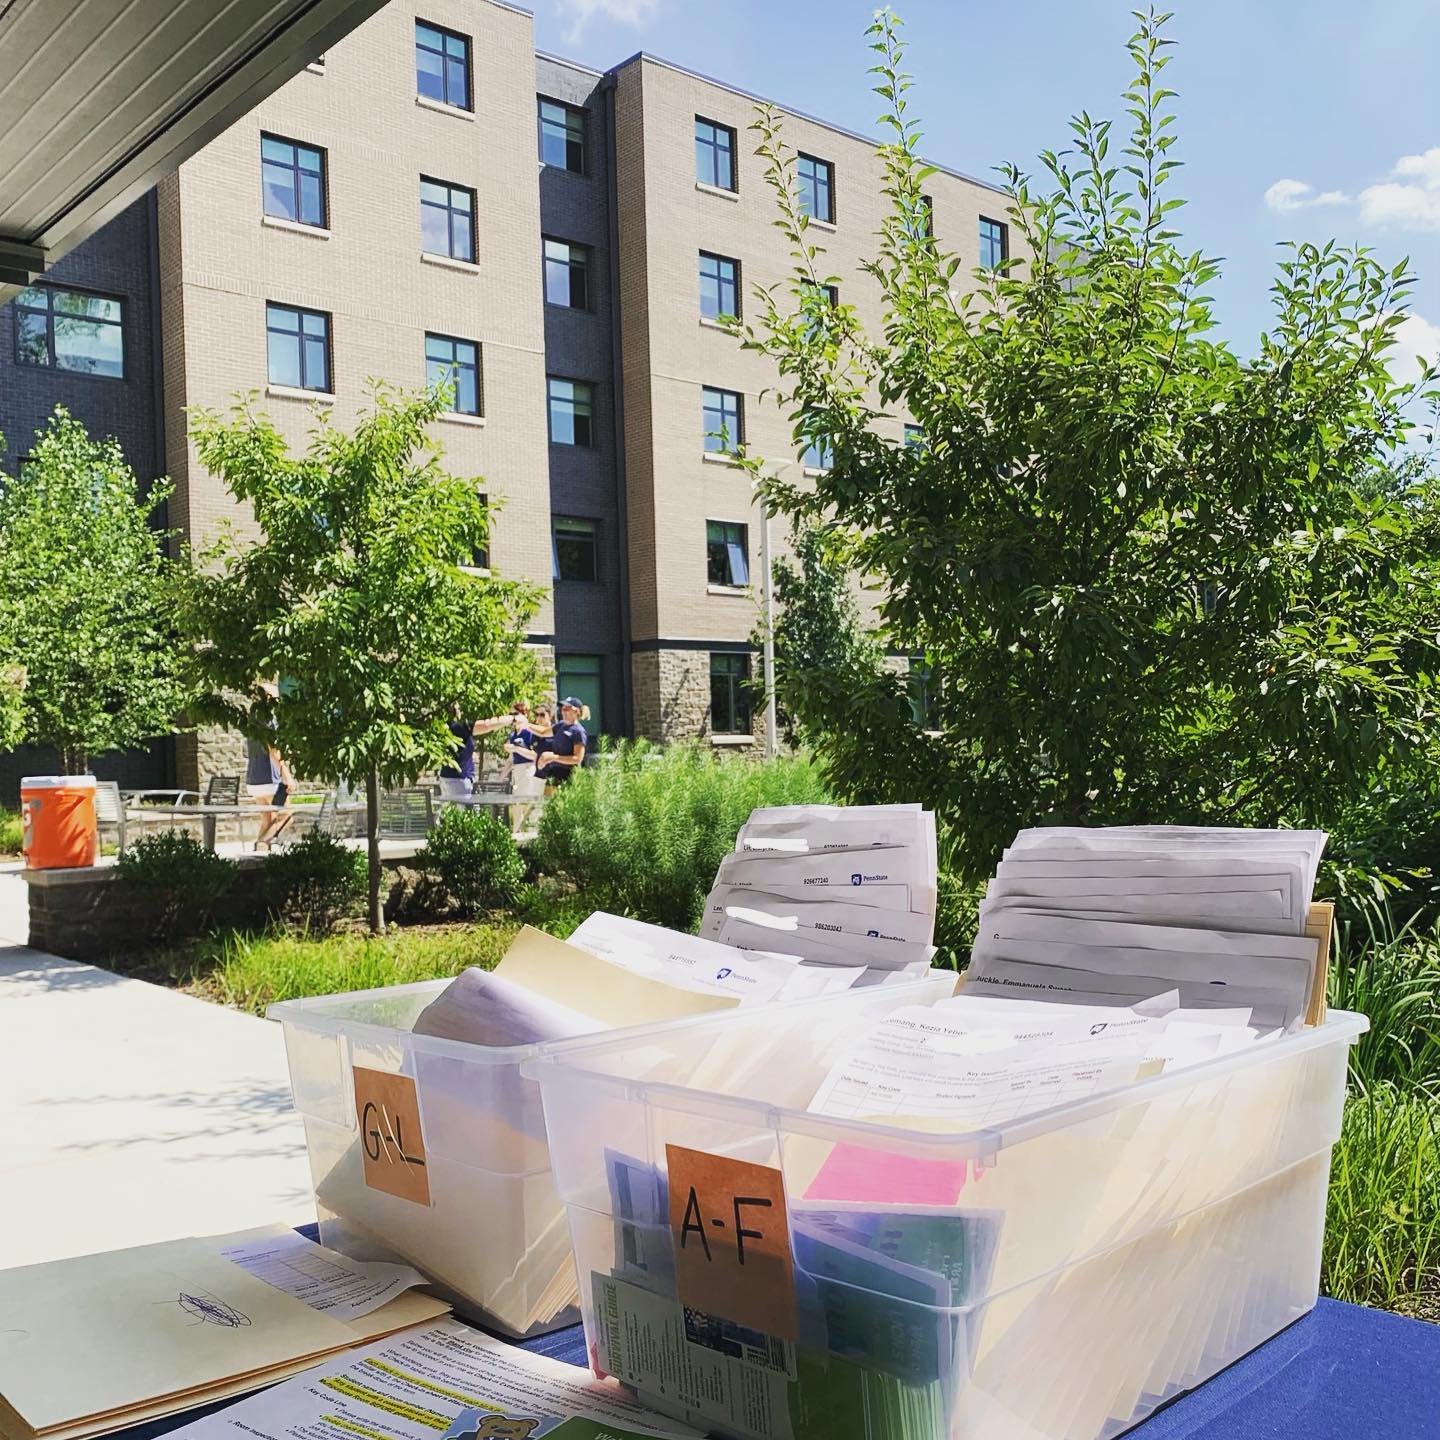 Two containers of documents sit on a blue welcome table for freshman orientation at Penn State University. Photo via Instagram user @lindseewood